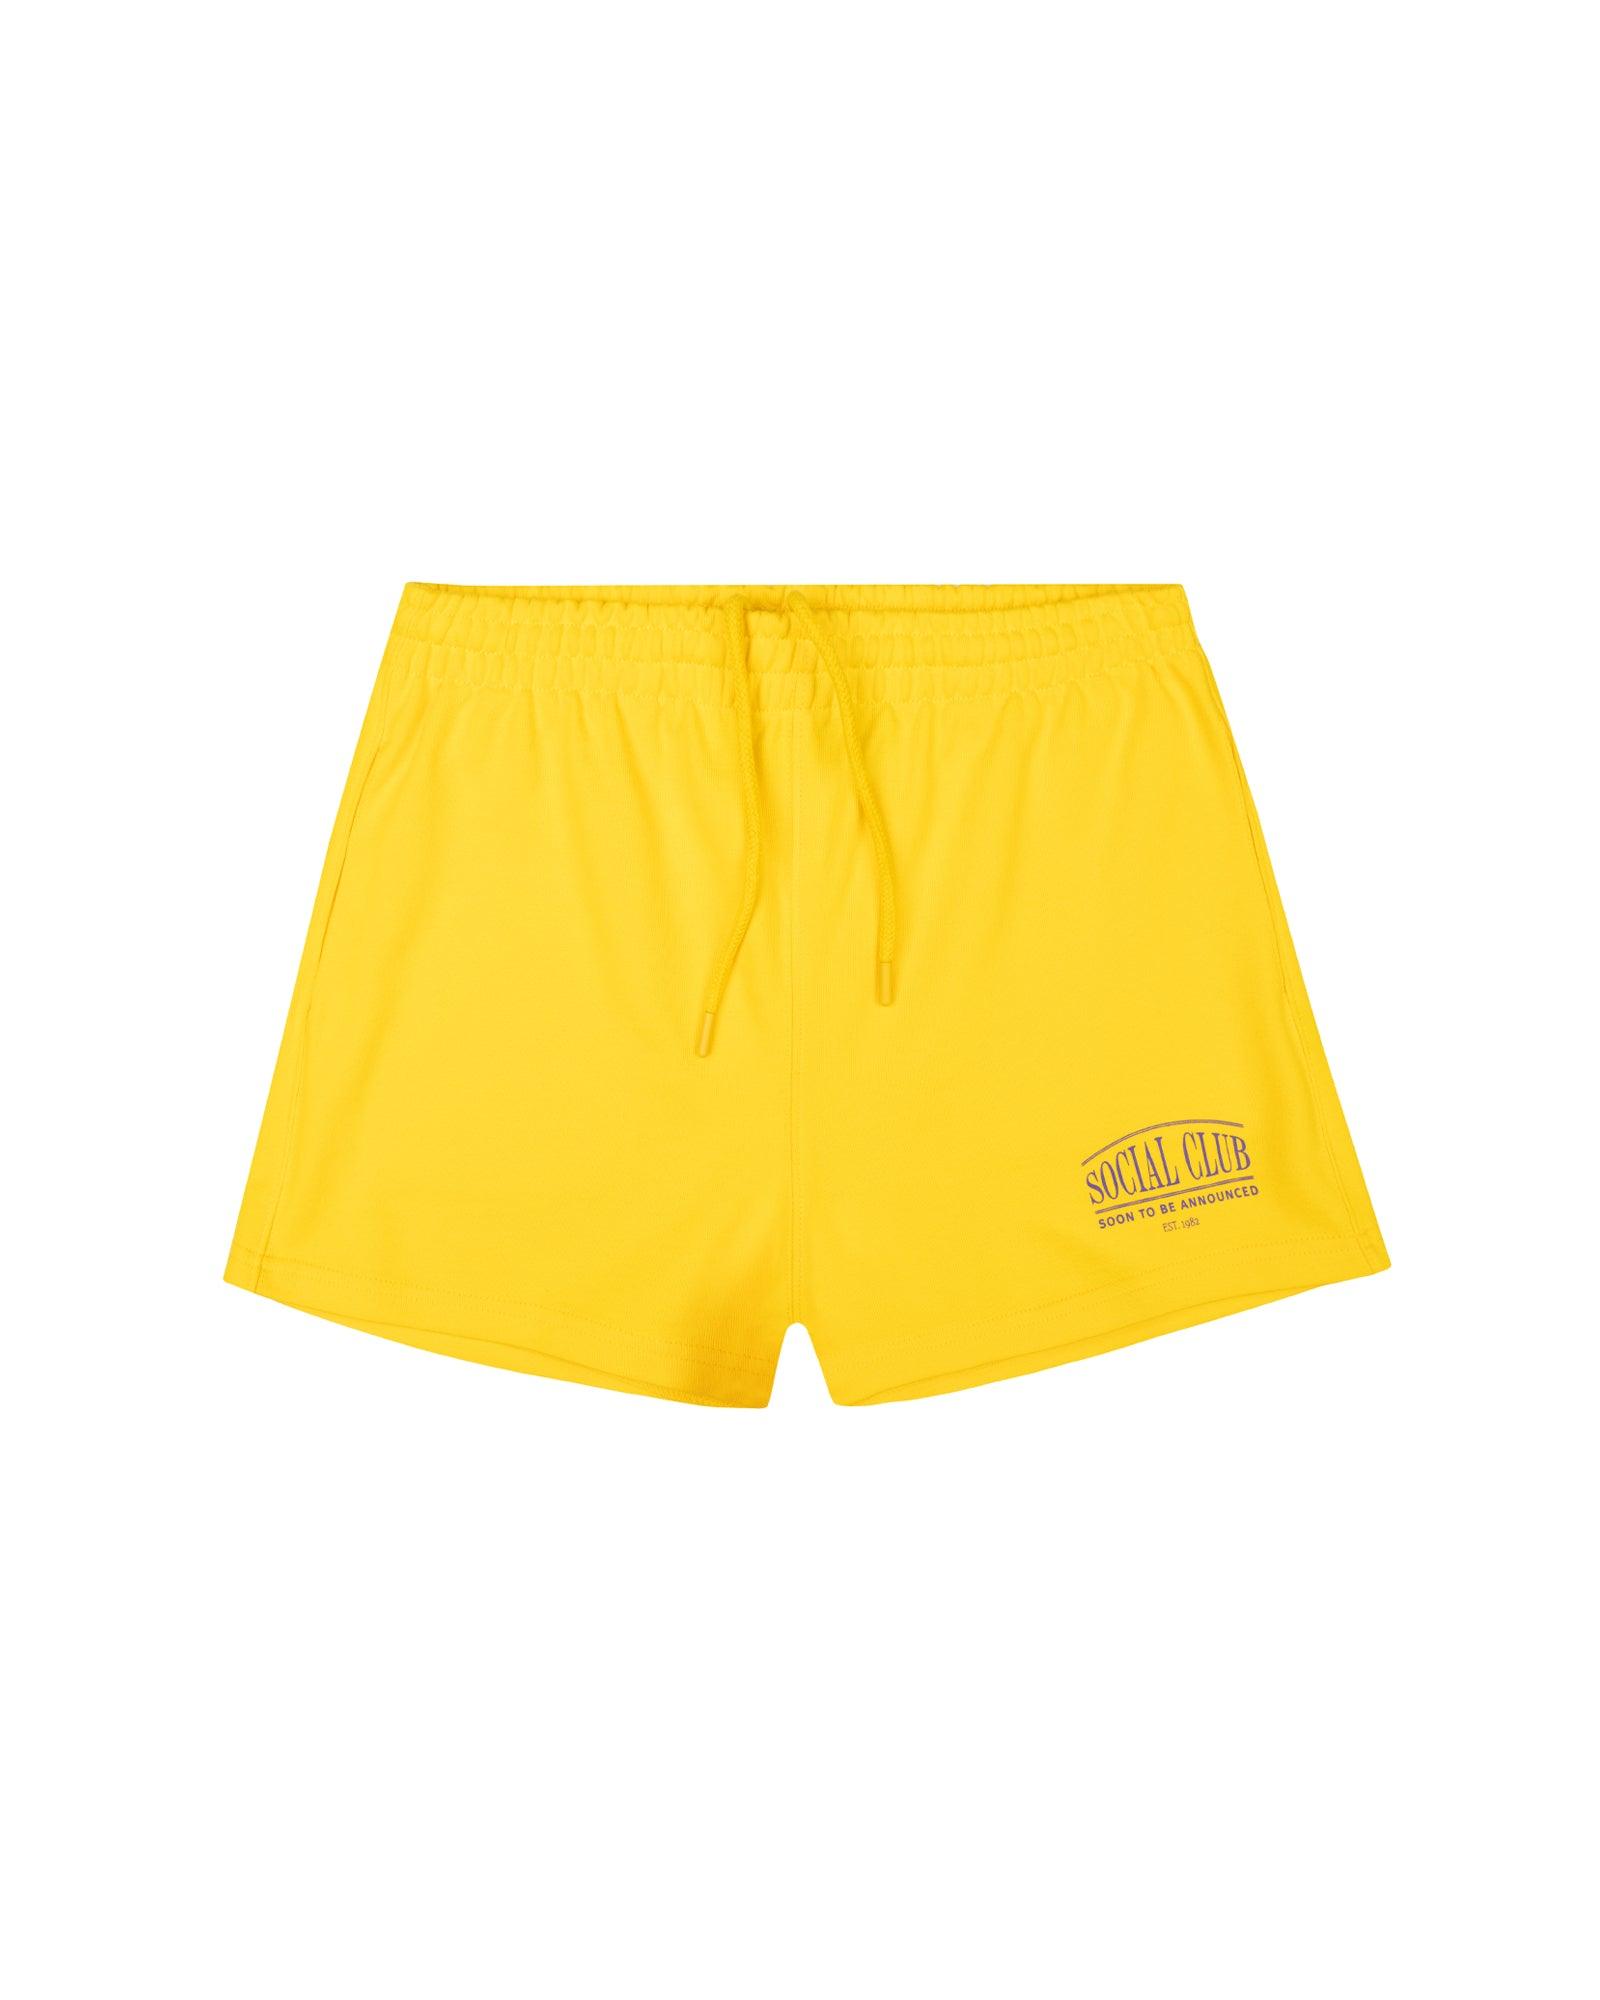 Alliance Shorts - SOON TO BE ANNOUNCED